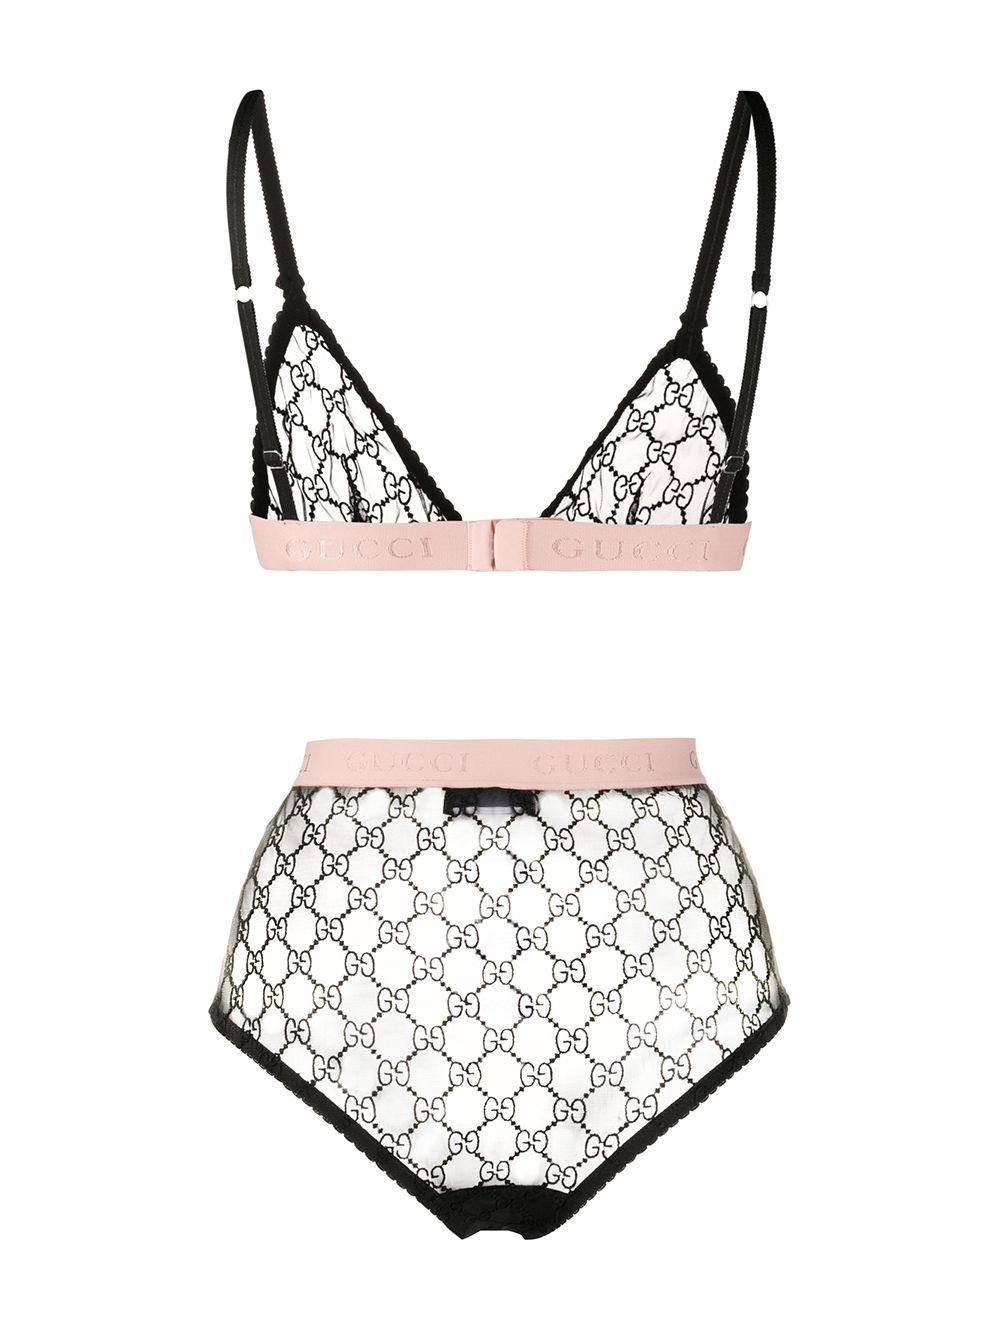 Gucci Synthetic Monogram Mesh Lingerie Set in Black - Lyst